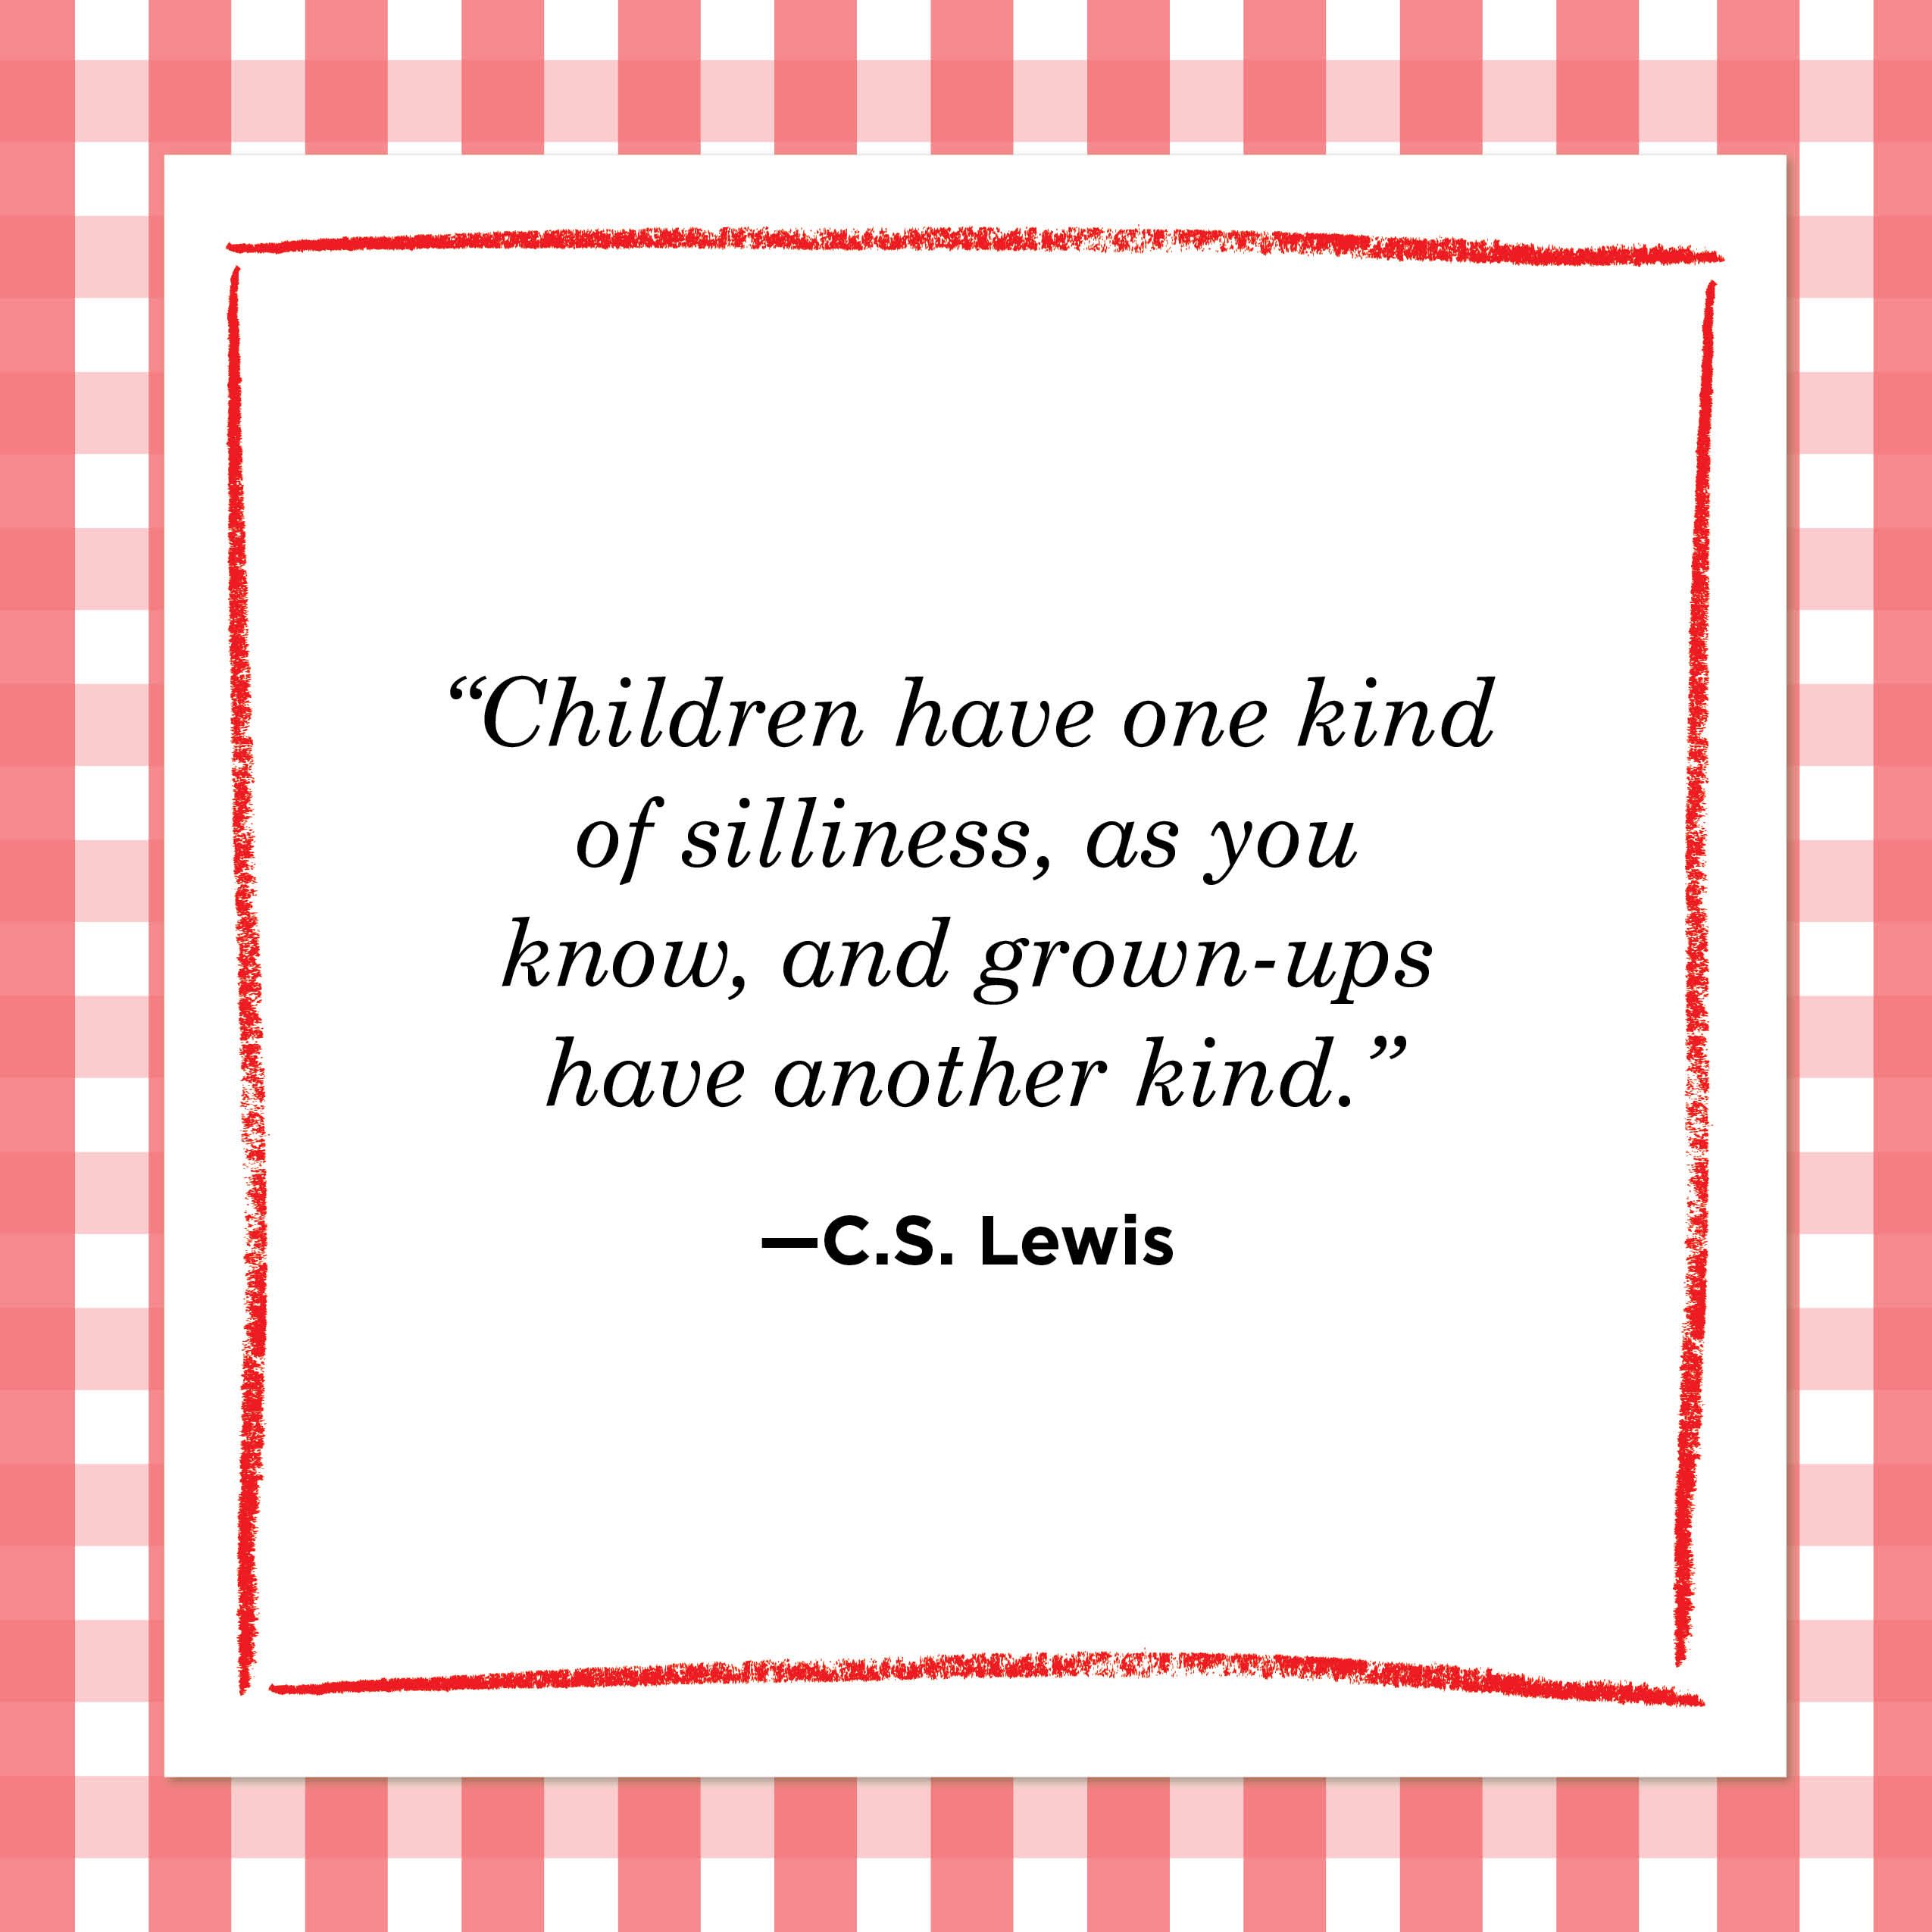 quotes about kids growing up